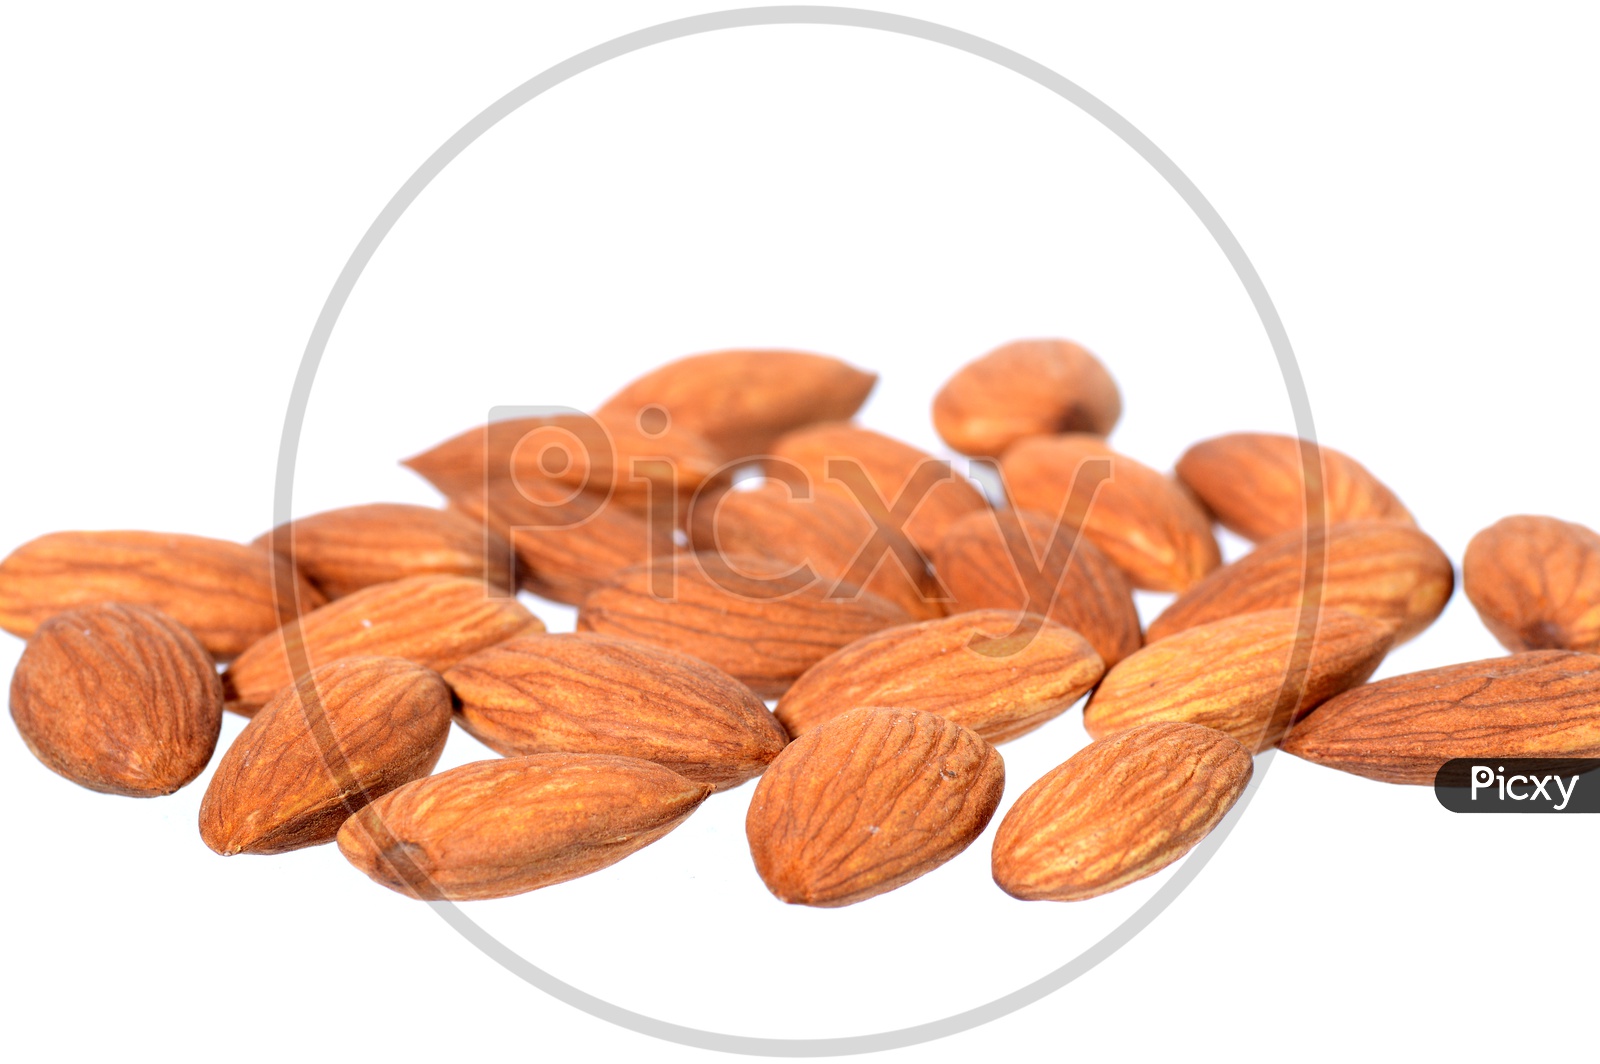 Almonds Or Badam Nuts Scattered on An Isolated White Background